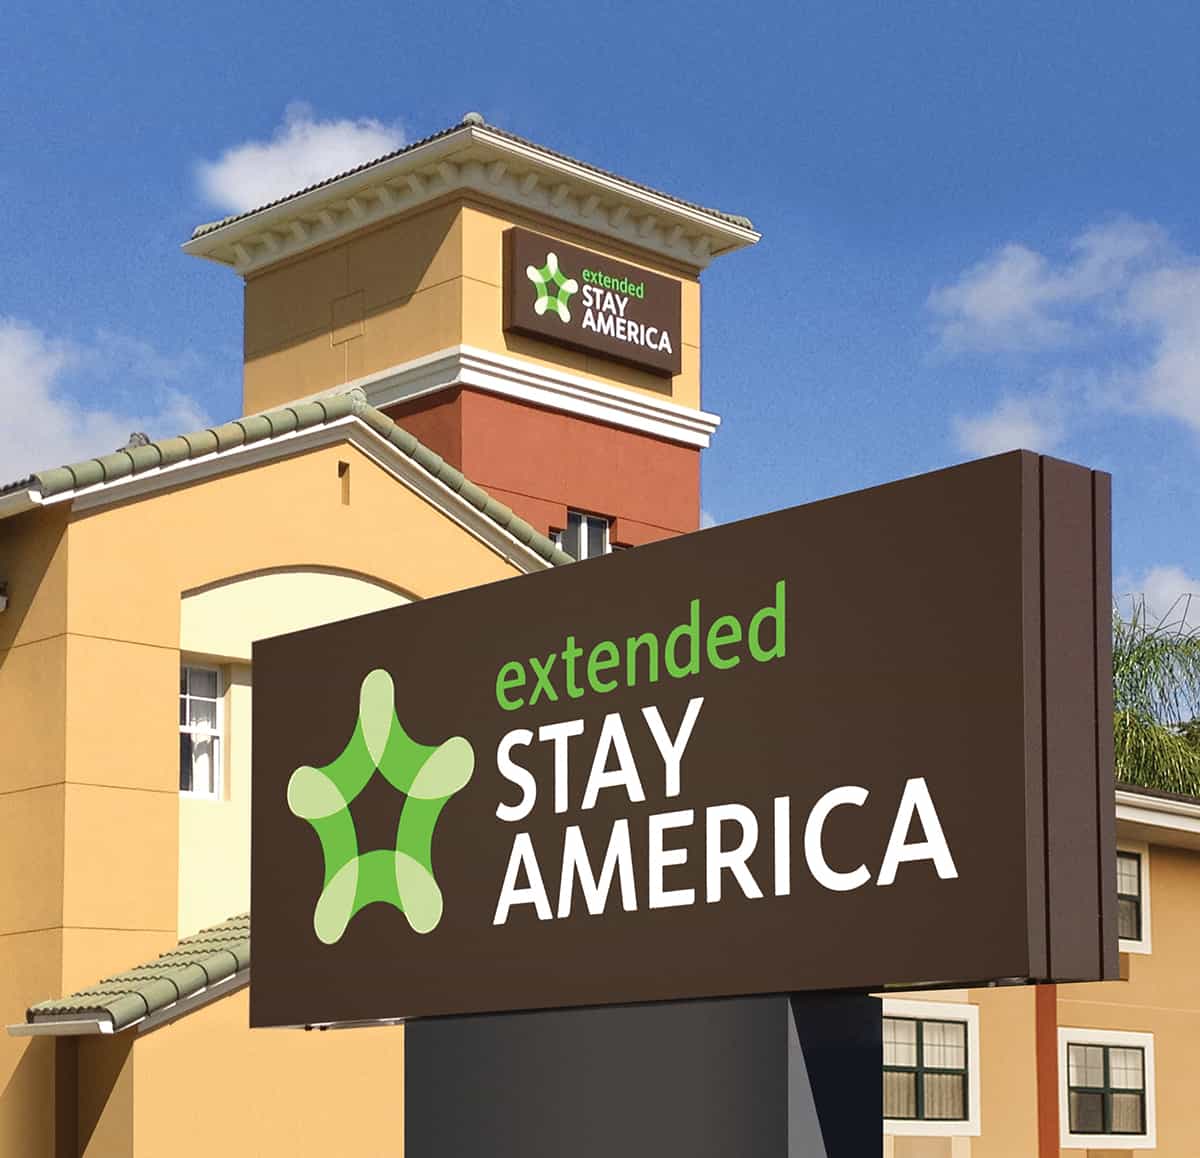 Extended Stay America Logo - Extended Stay America Logo Wellness Centers